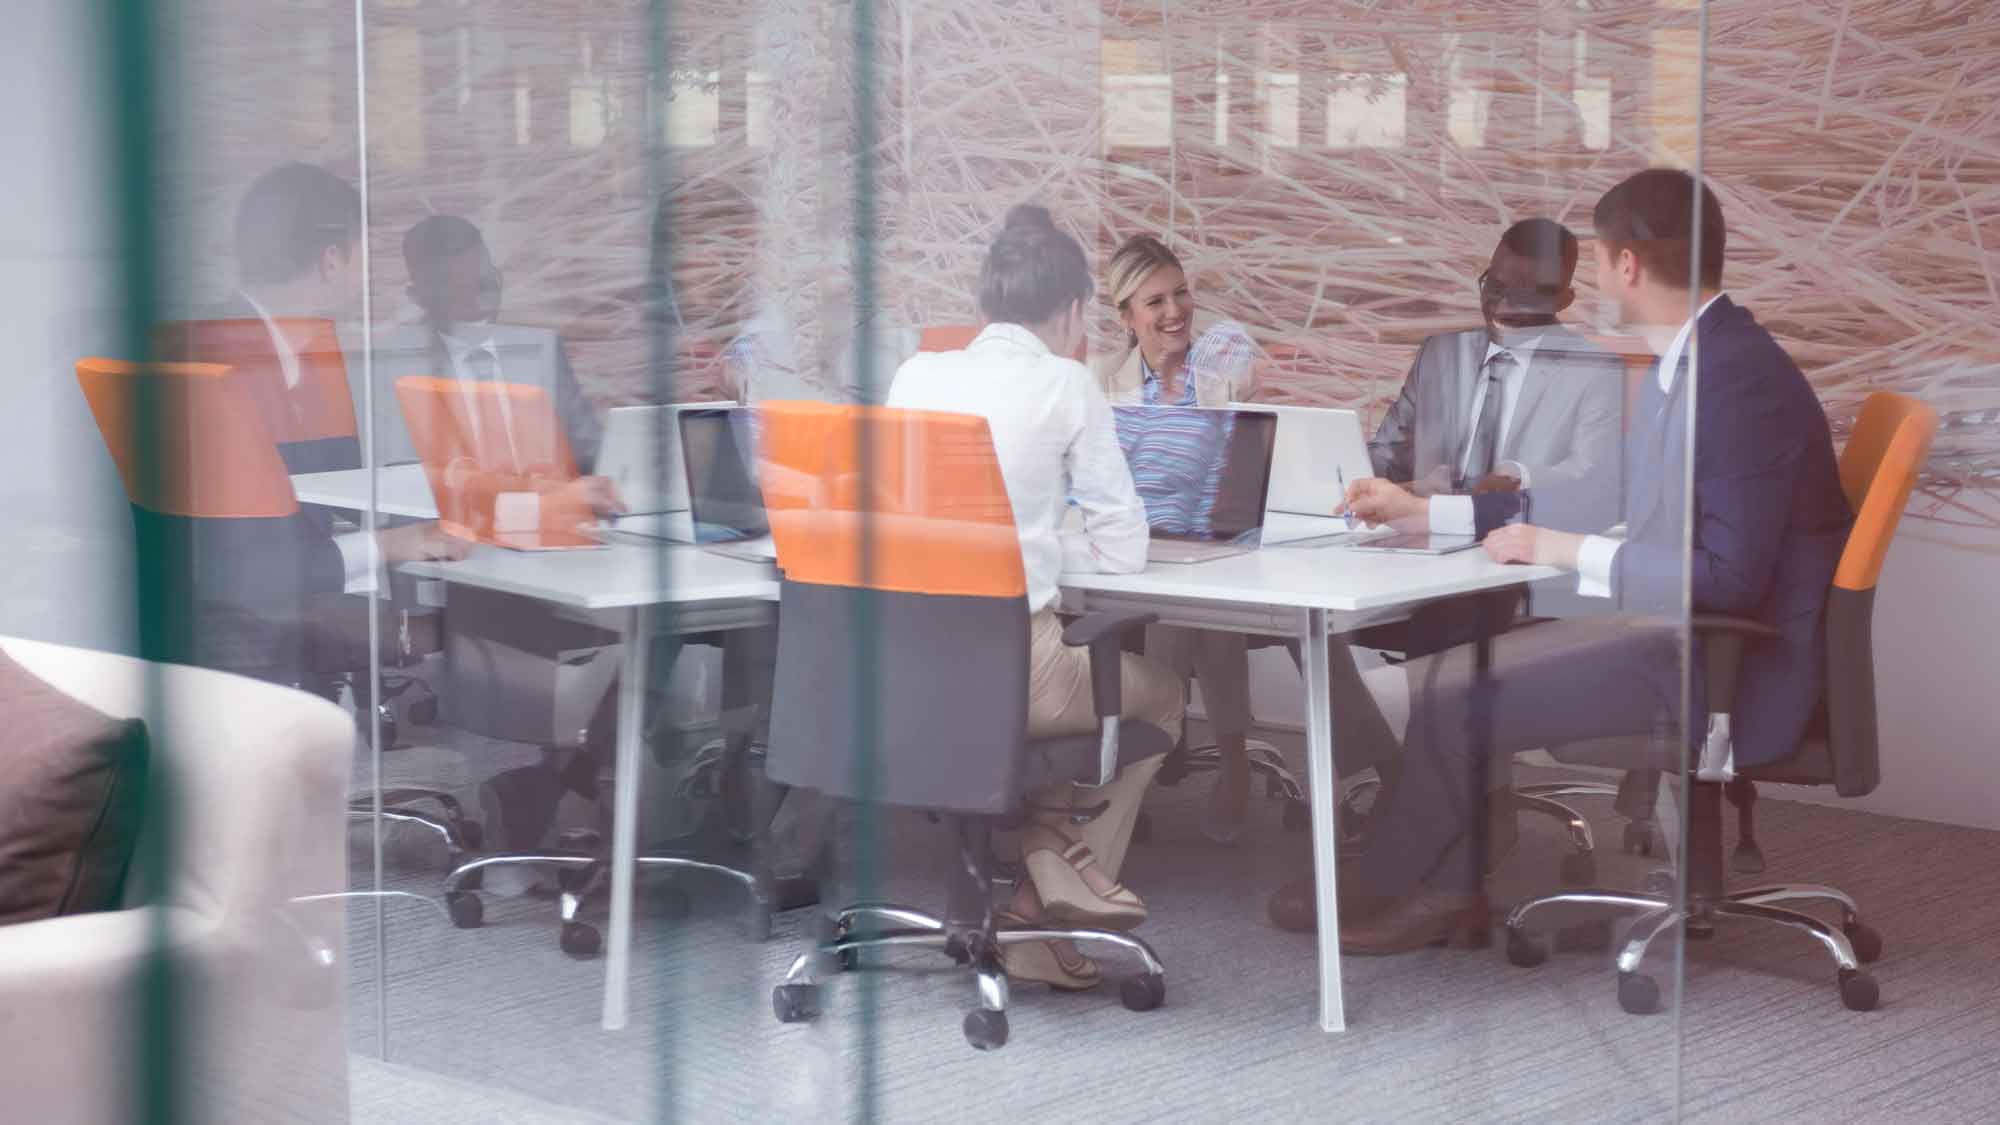 Group of people in an office in front of glass